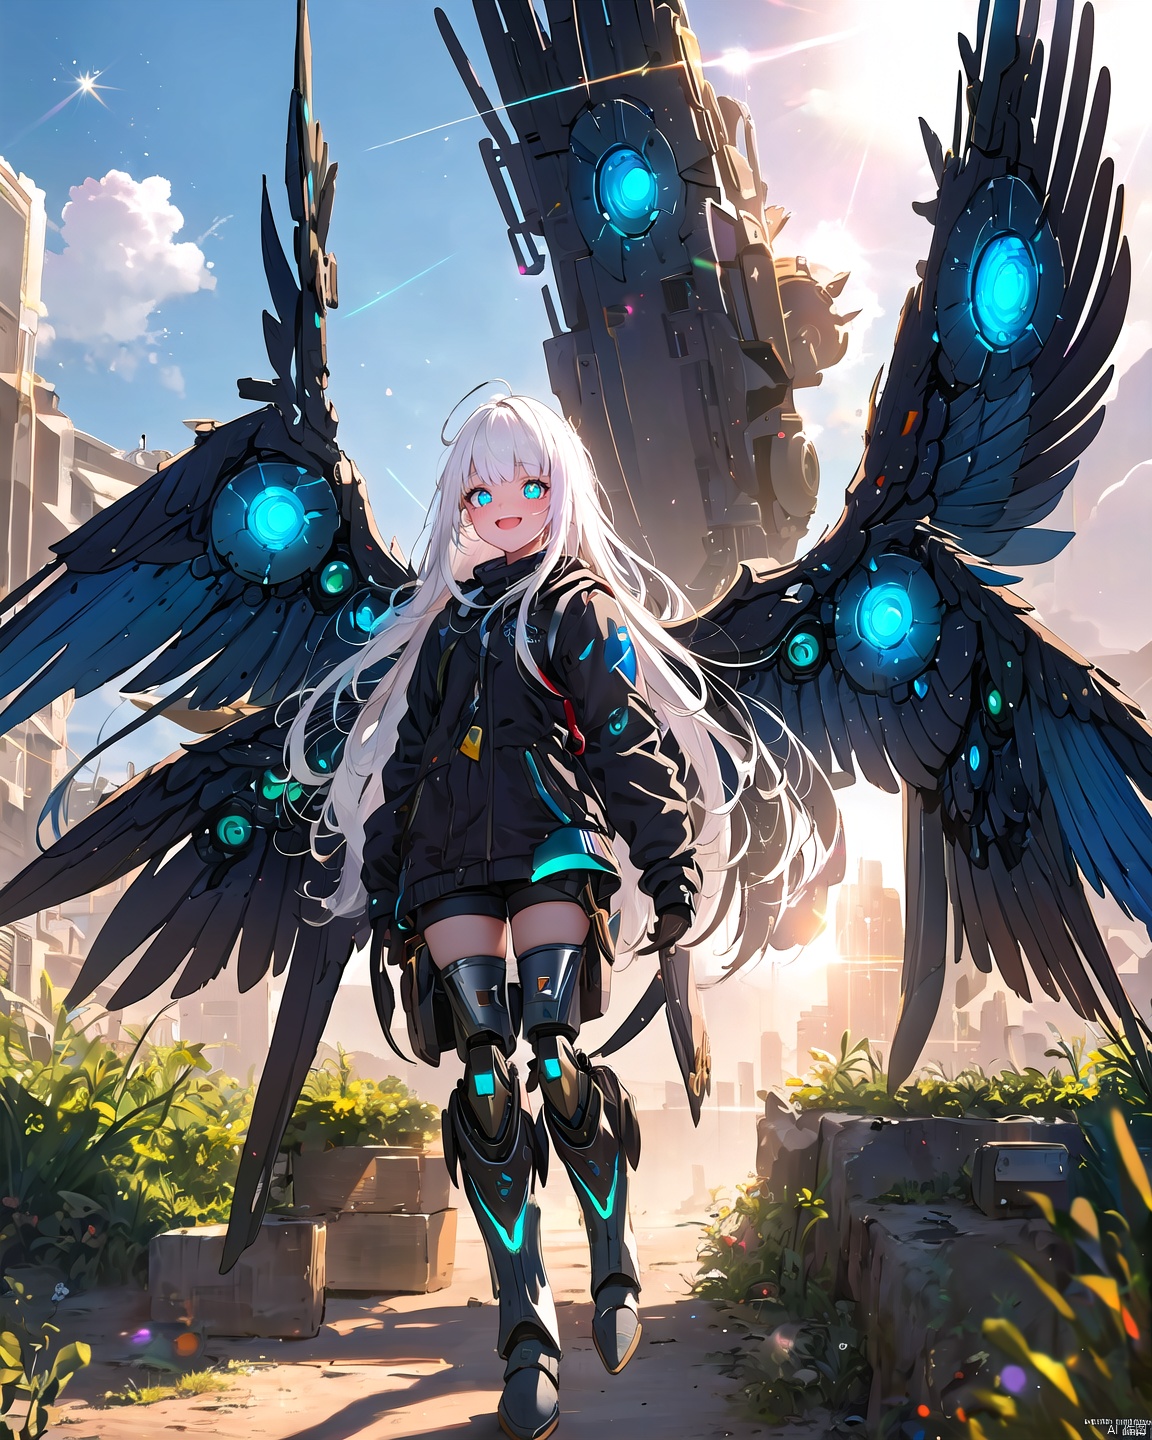 1 18-year-old beautiful girl +(detailed face)+ white hair + long hair + bangs + sunny and cheerful + blue pupils + mechanical legs + boots + wings Apocalyptic + sci-fi mechanical wings with fan +More details + color + lens flare,<lora:EMS-273028-EMS:1.000000>